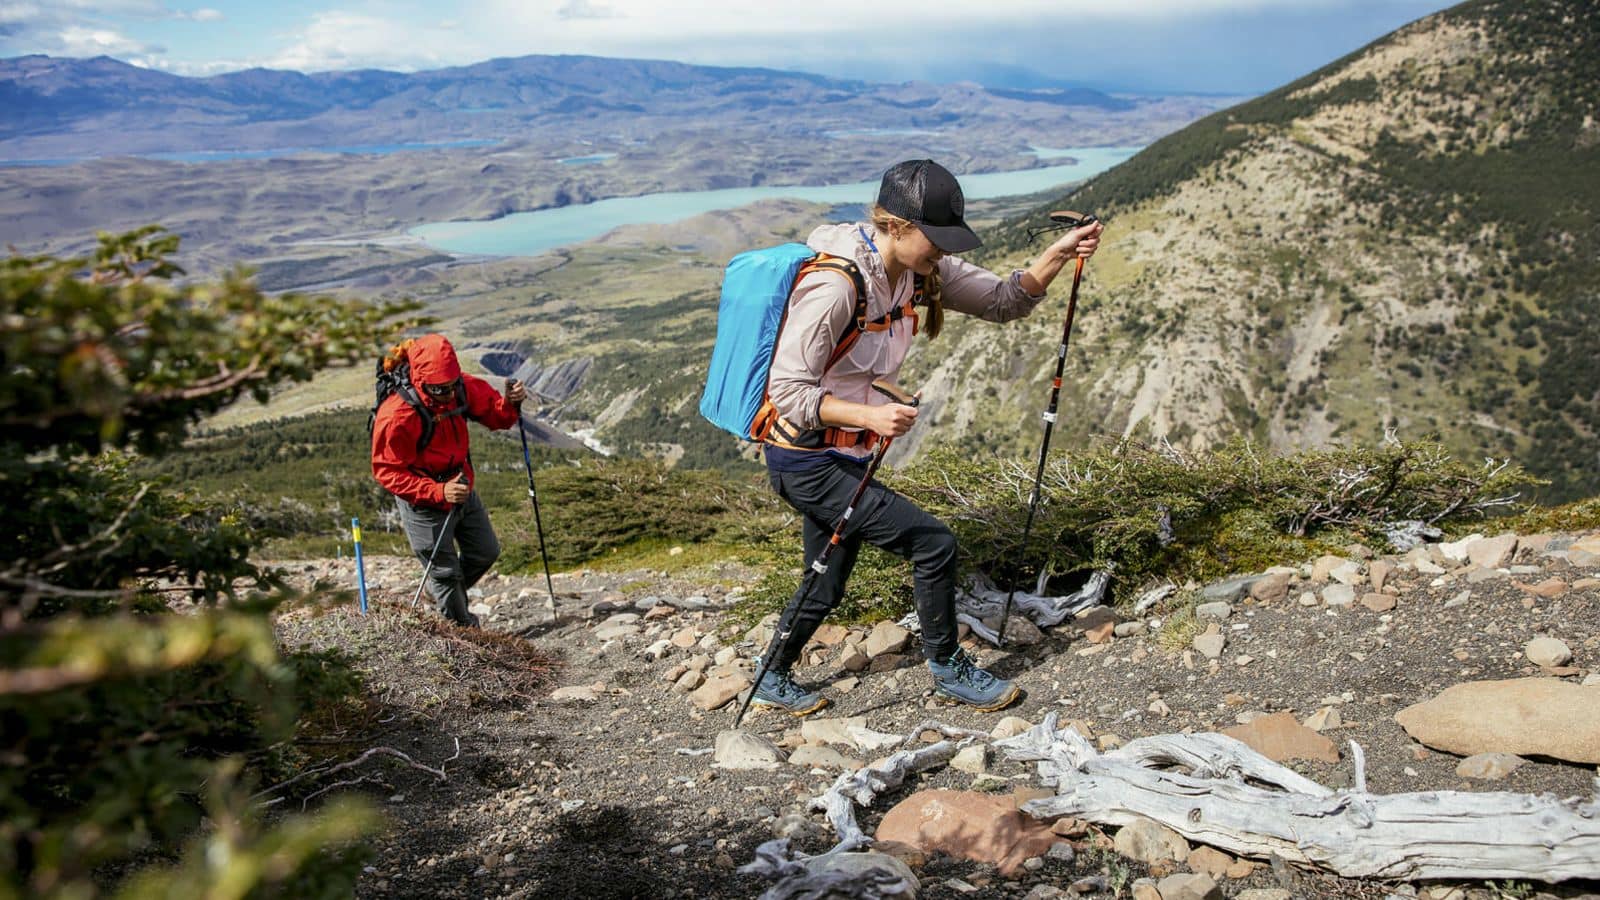 Trekking through Patagonia: Tips for a safe experience